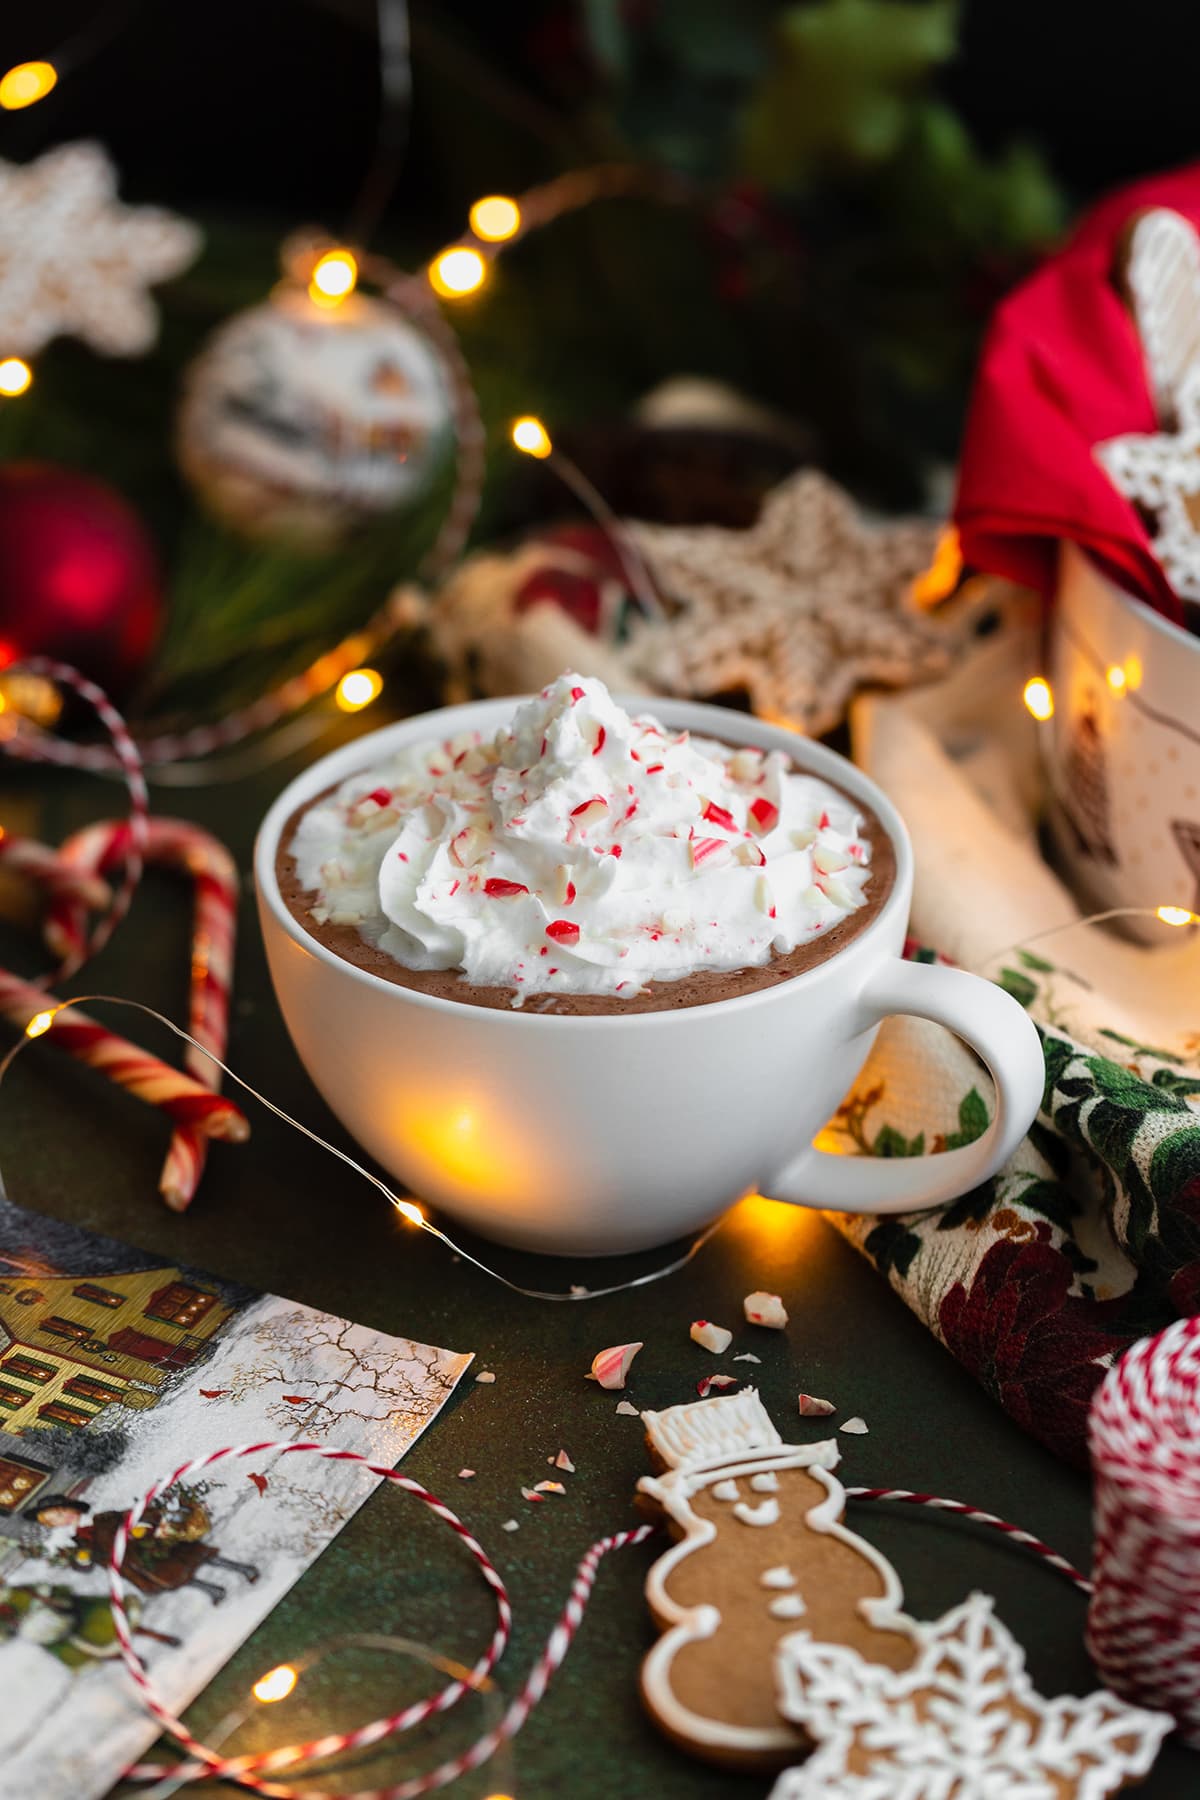 Peppermint hot chocolate in a white cup topped with whipped cream and crushed candy cane. Gingerbread cookies aranged around the cup. Dark green background.